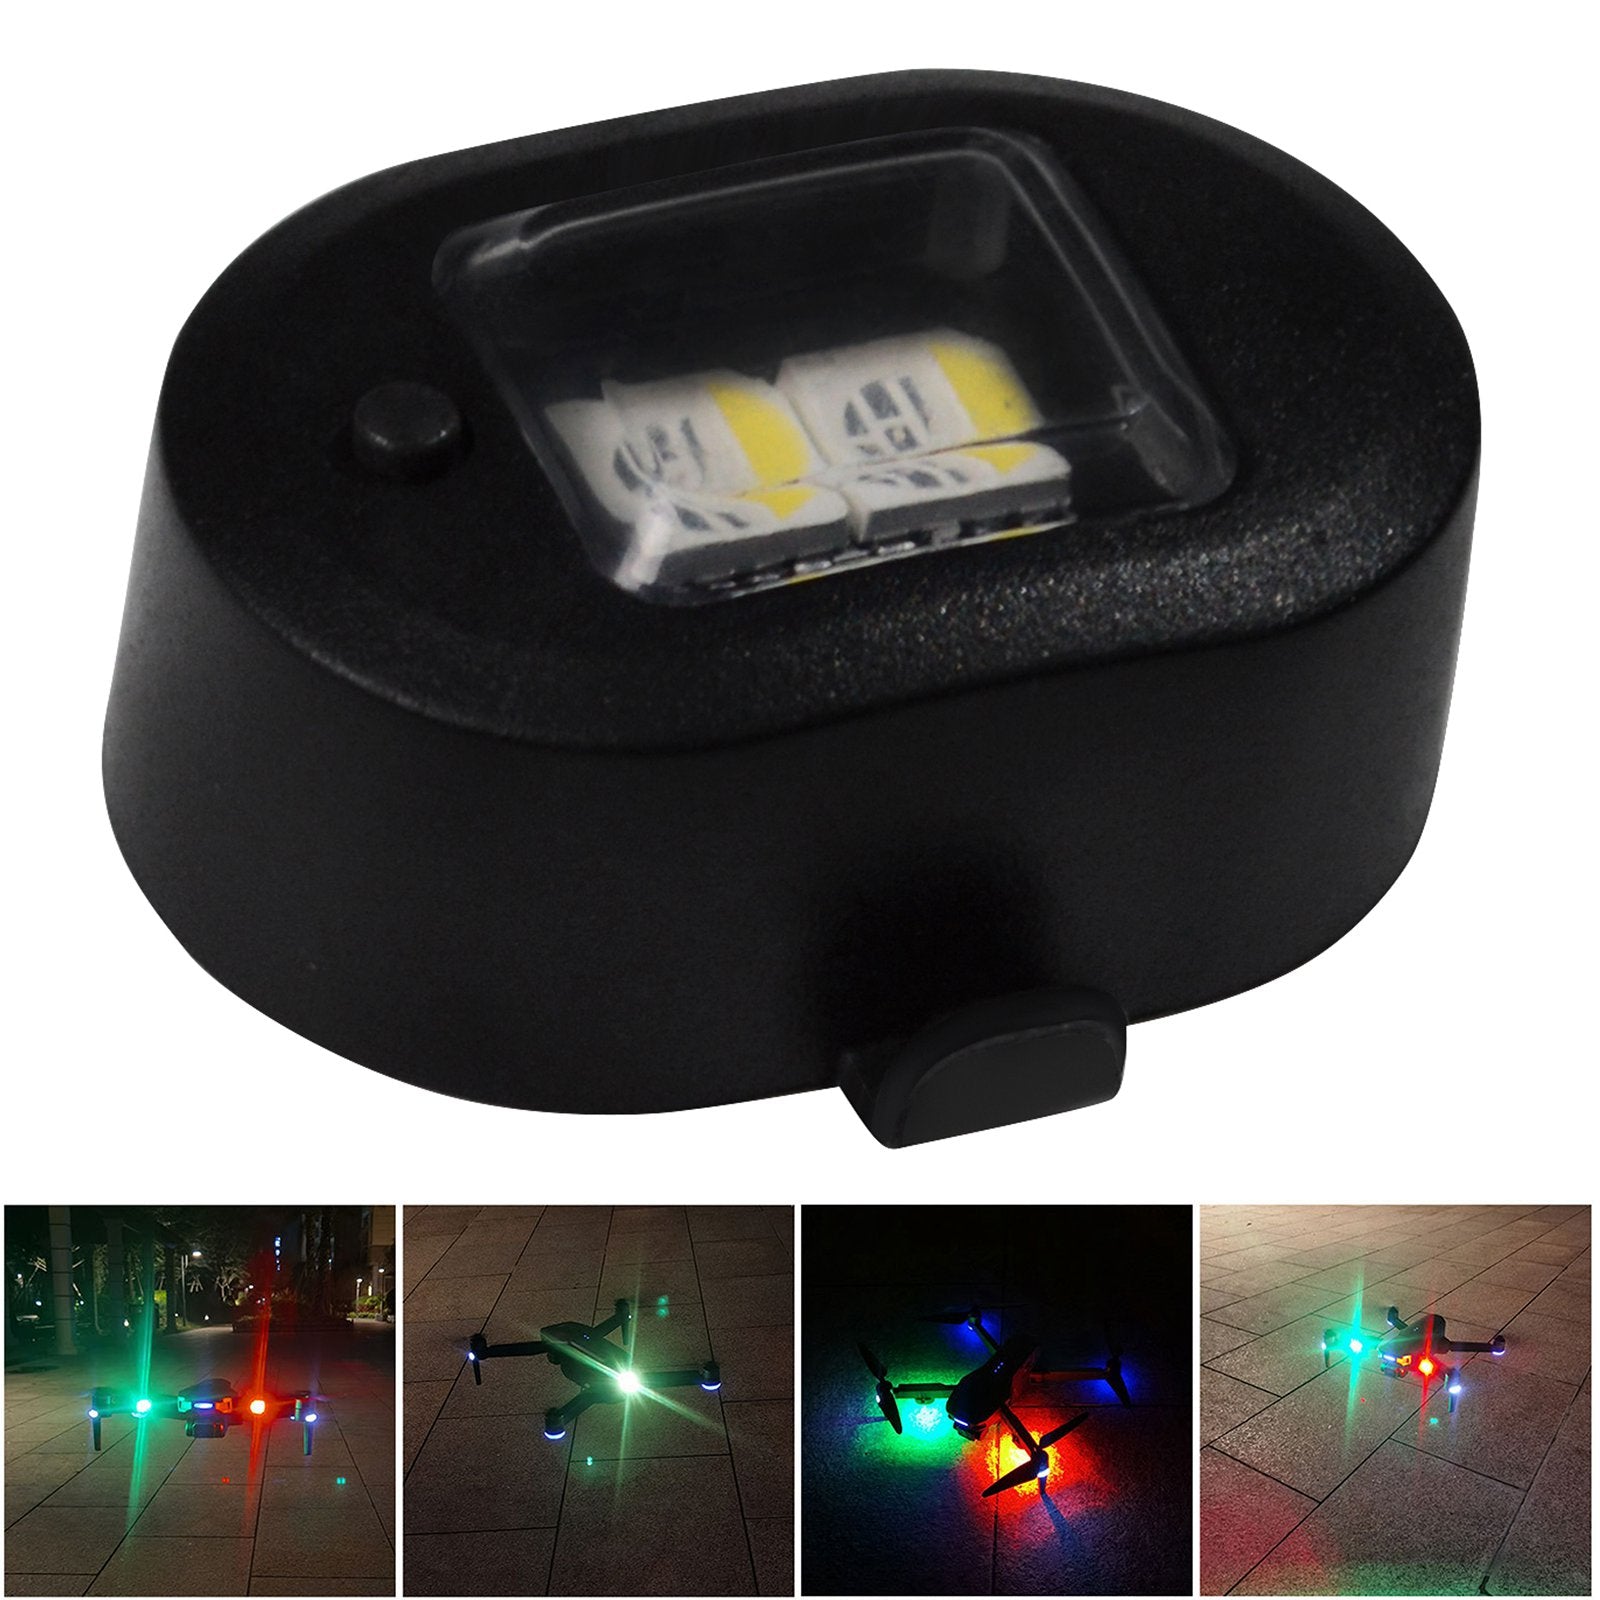 DABSD040 For DJI Mini 3 Pro/Air 2S/Mavic 3 7-Color LED Drone Light Rechargeable Drone Night Flight Flashing Lamp